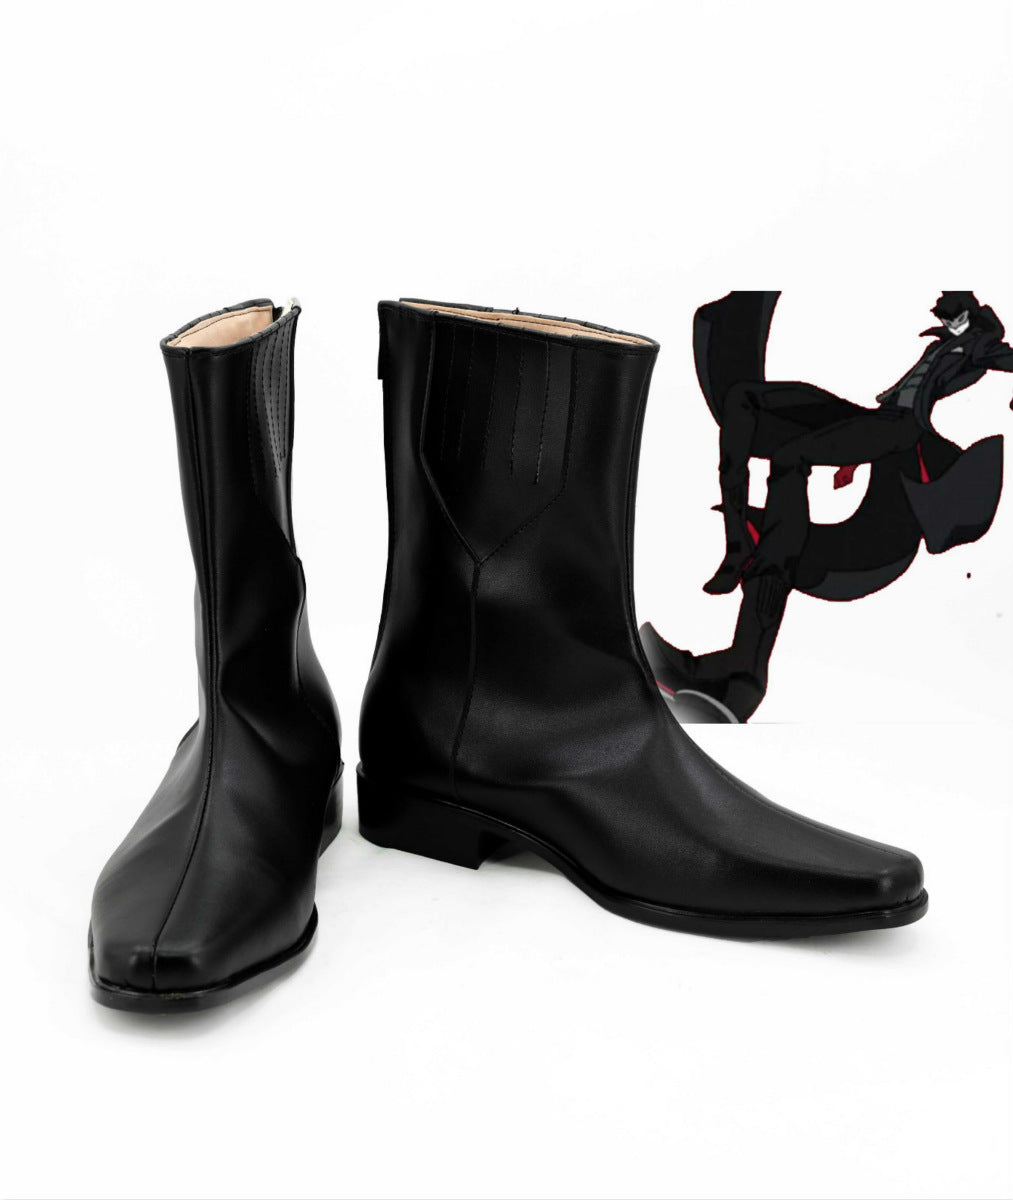 Persona 5 Joker Bottes Cosplay Chaussures